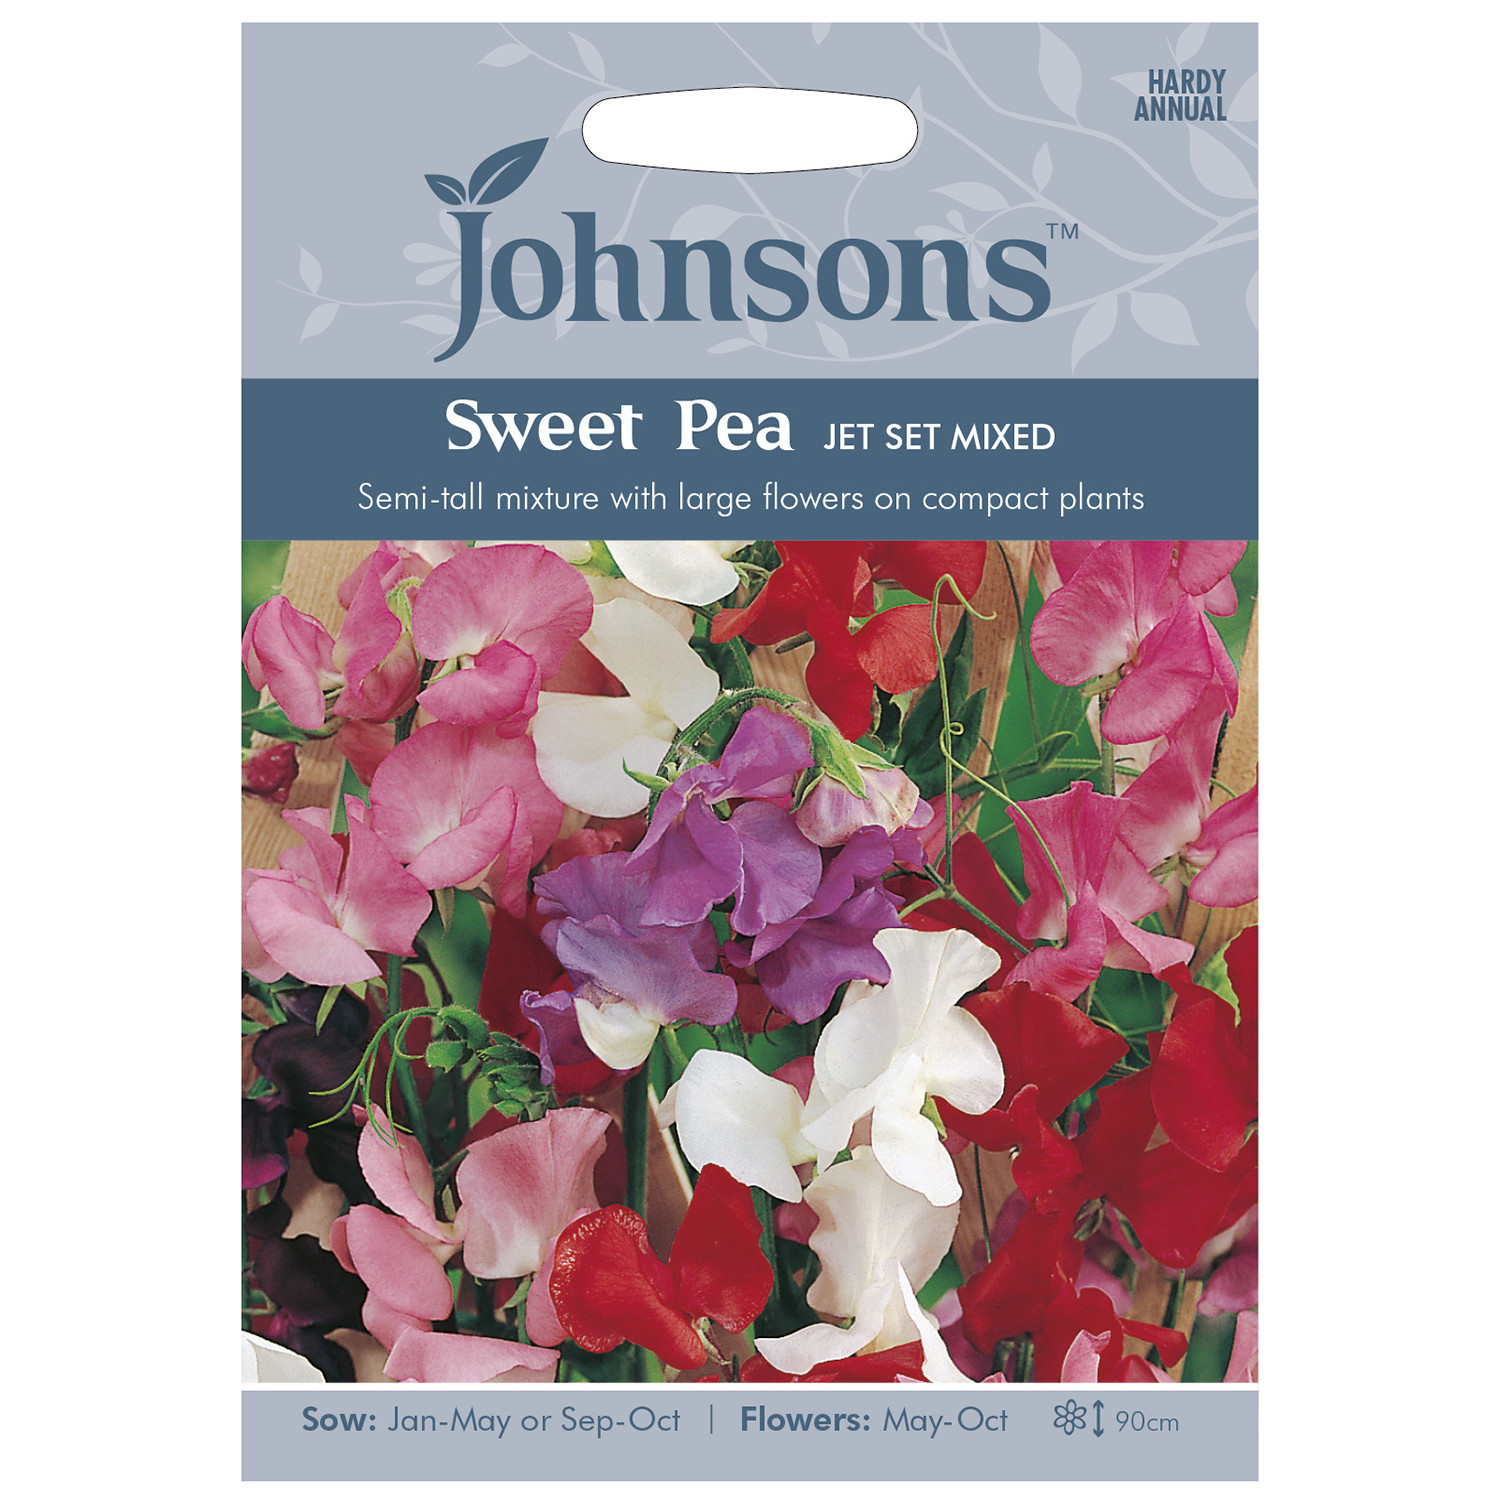 Pack of Jet Set Mixed Sweet Pea Flower Seeds Image